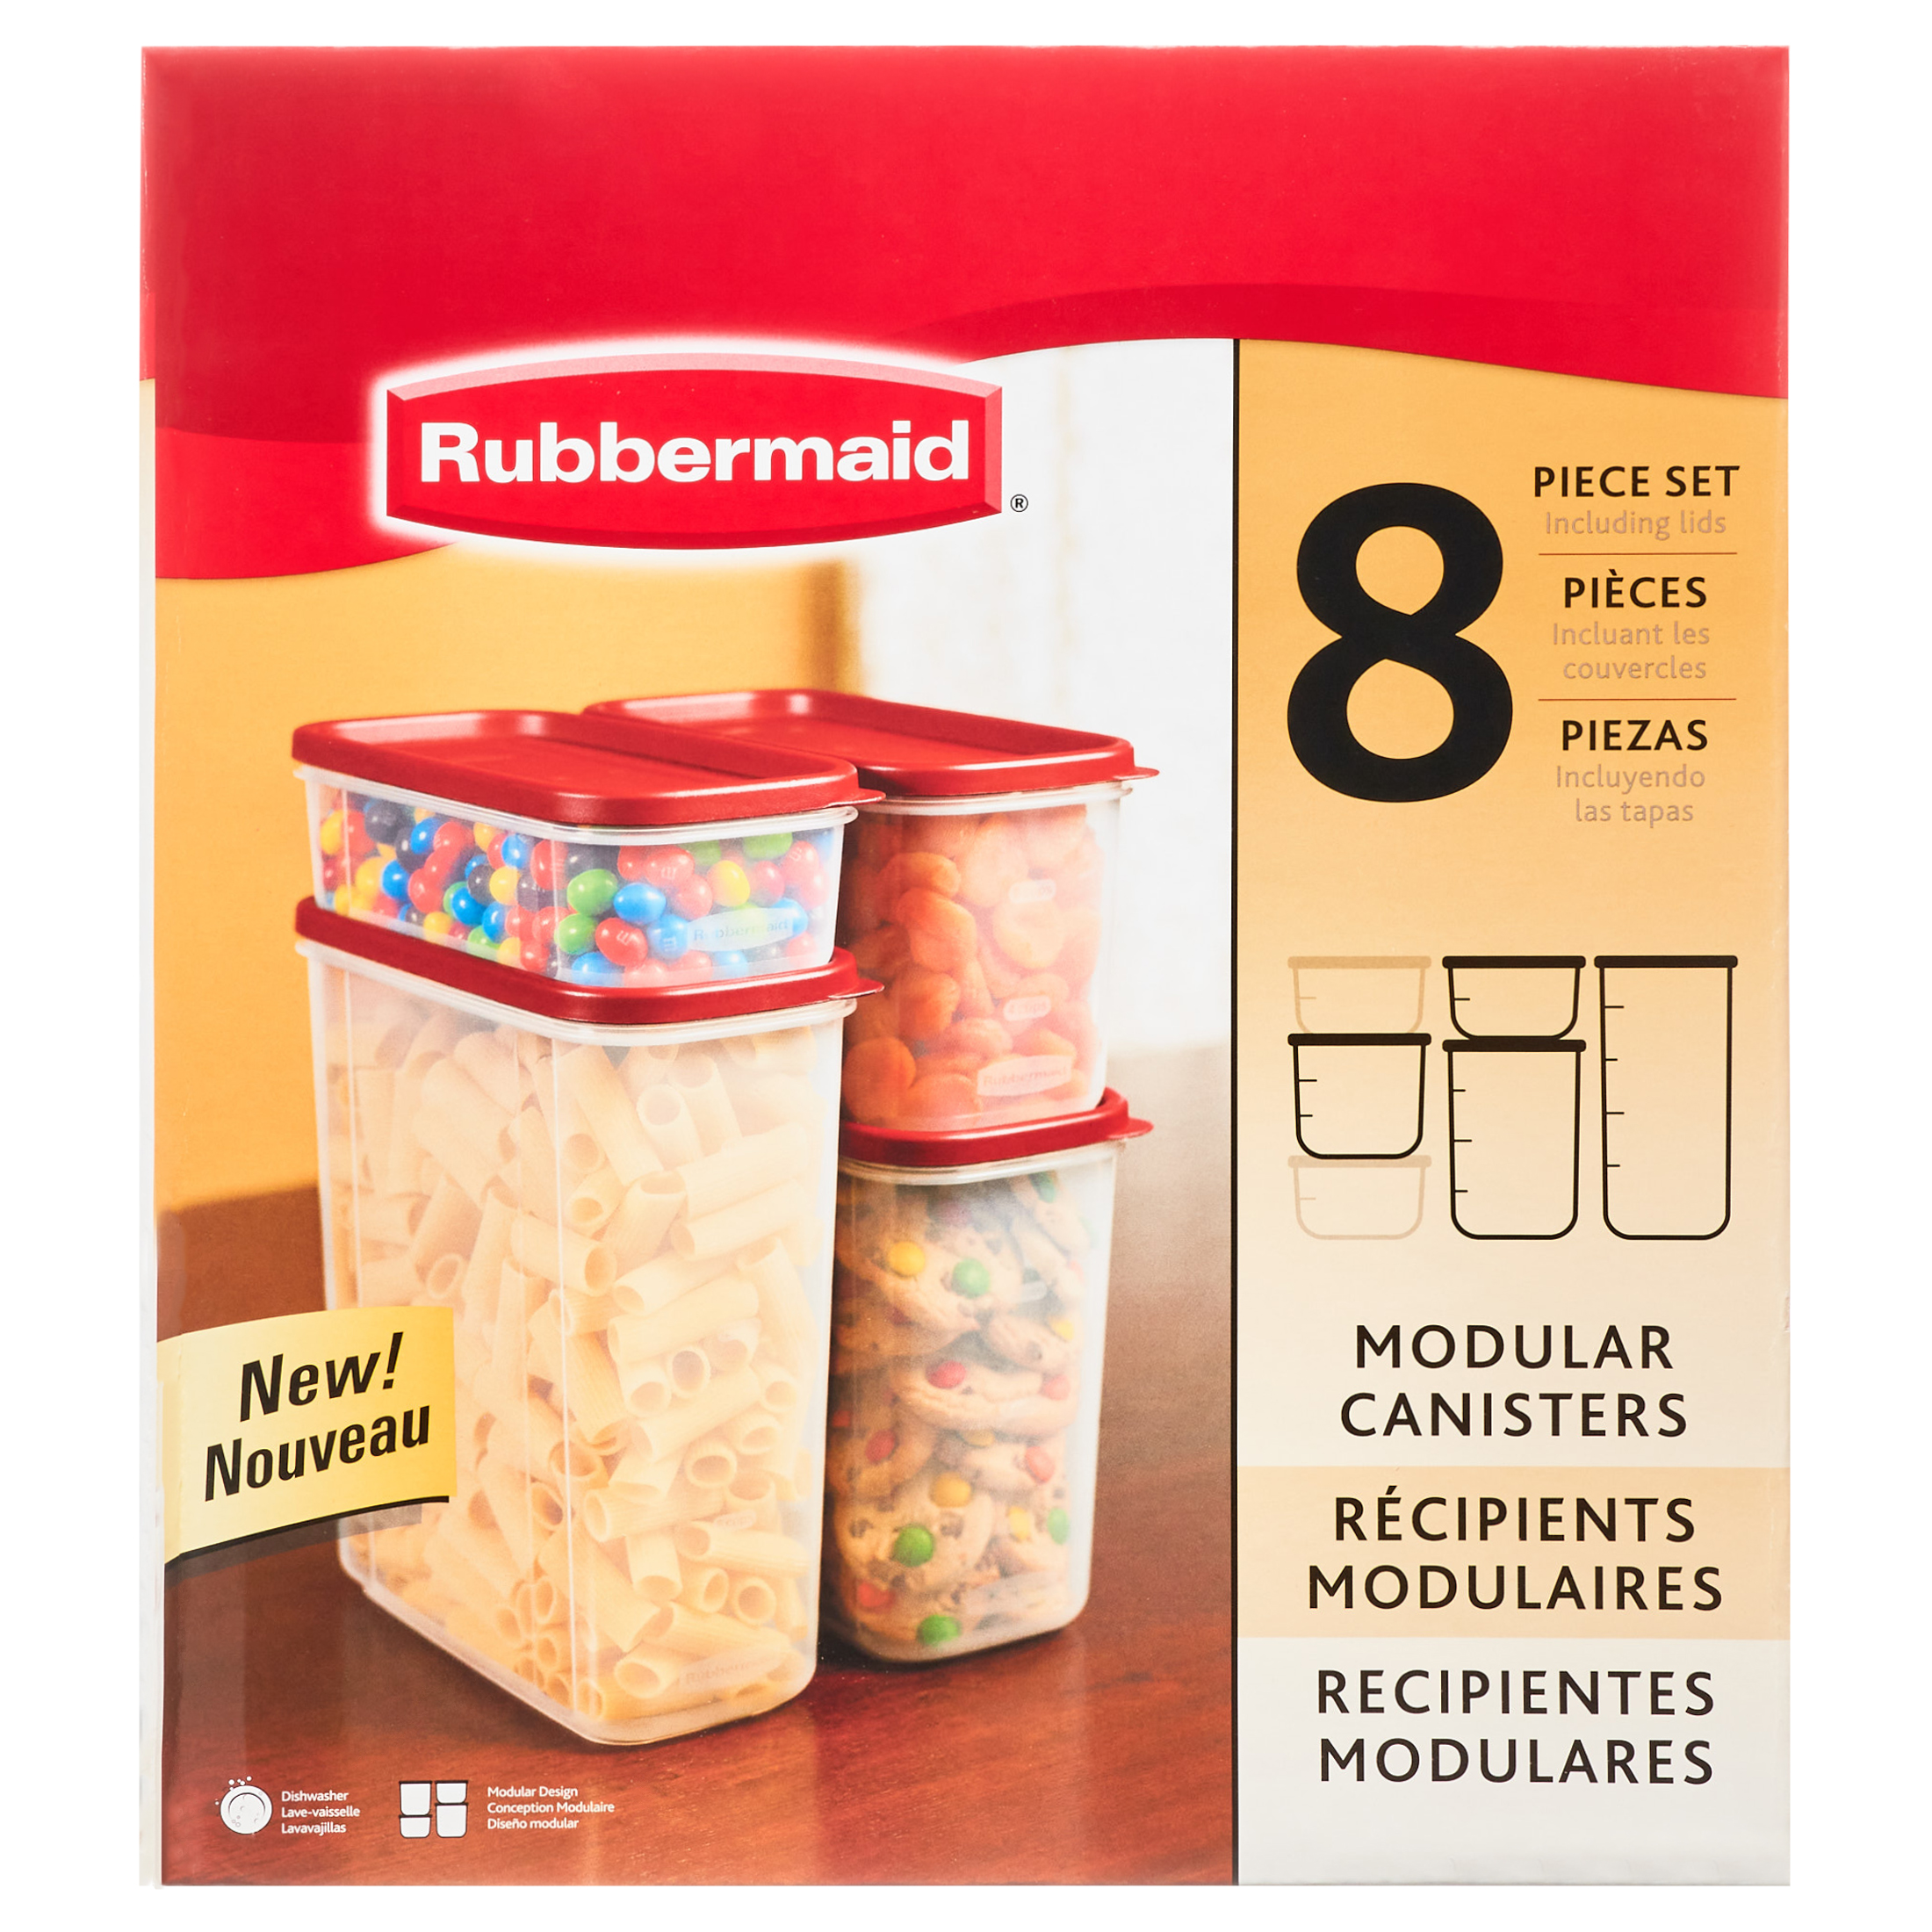 Rubbermaid Modular Pantry Canister Set, 8pcs - image 3 of 12